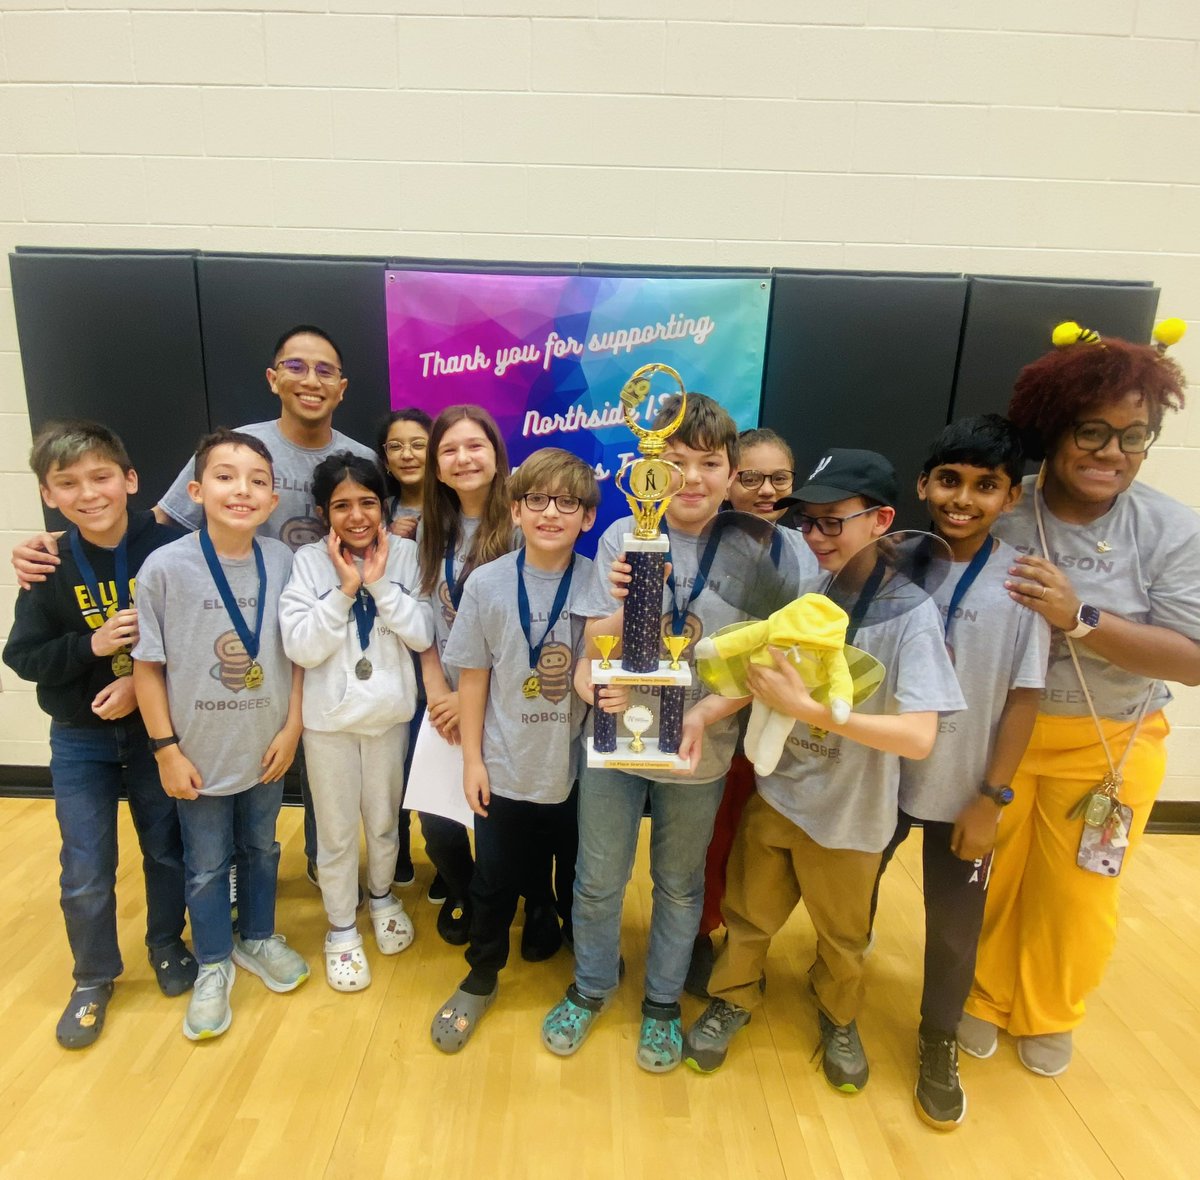 Congratulations @NISDEllison who earned the @NISD Grand Champions award at the Elementary Teams Robotics Championship today!! Those ROBObees 🐝 could not have been more excited!! 🎊🎊🎊 @NISDElemCI @NISDElemScience @WeGoPublic @bobbyblount22 @FIRSTinTexas